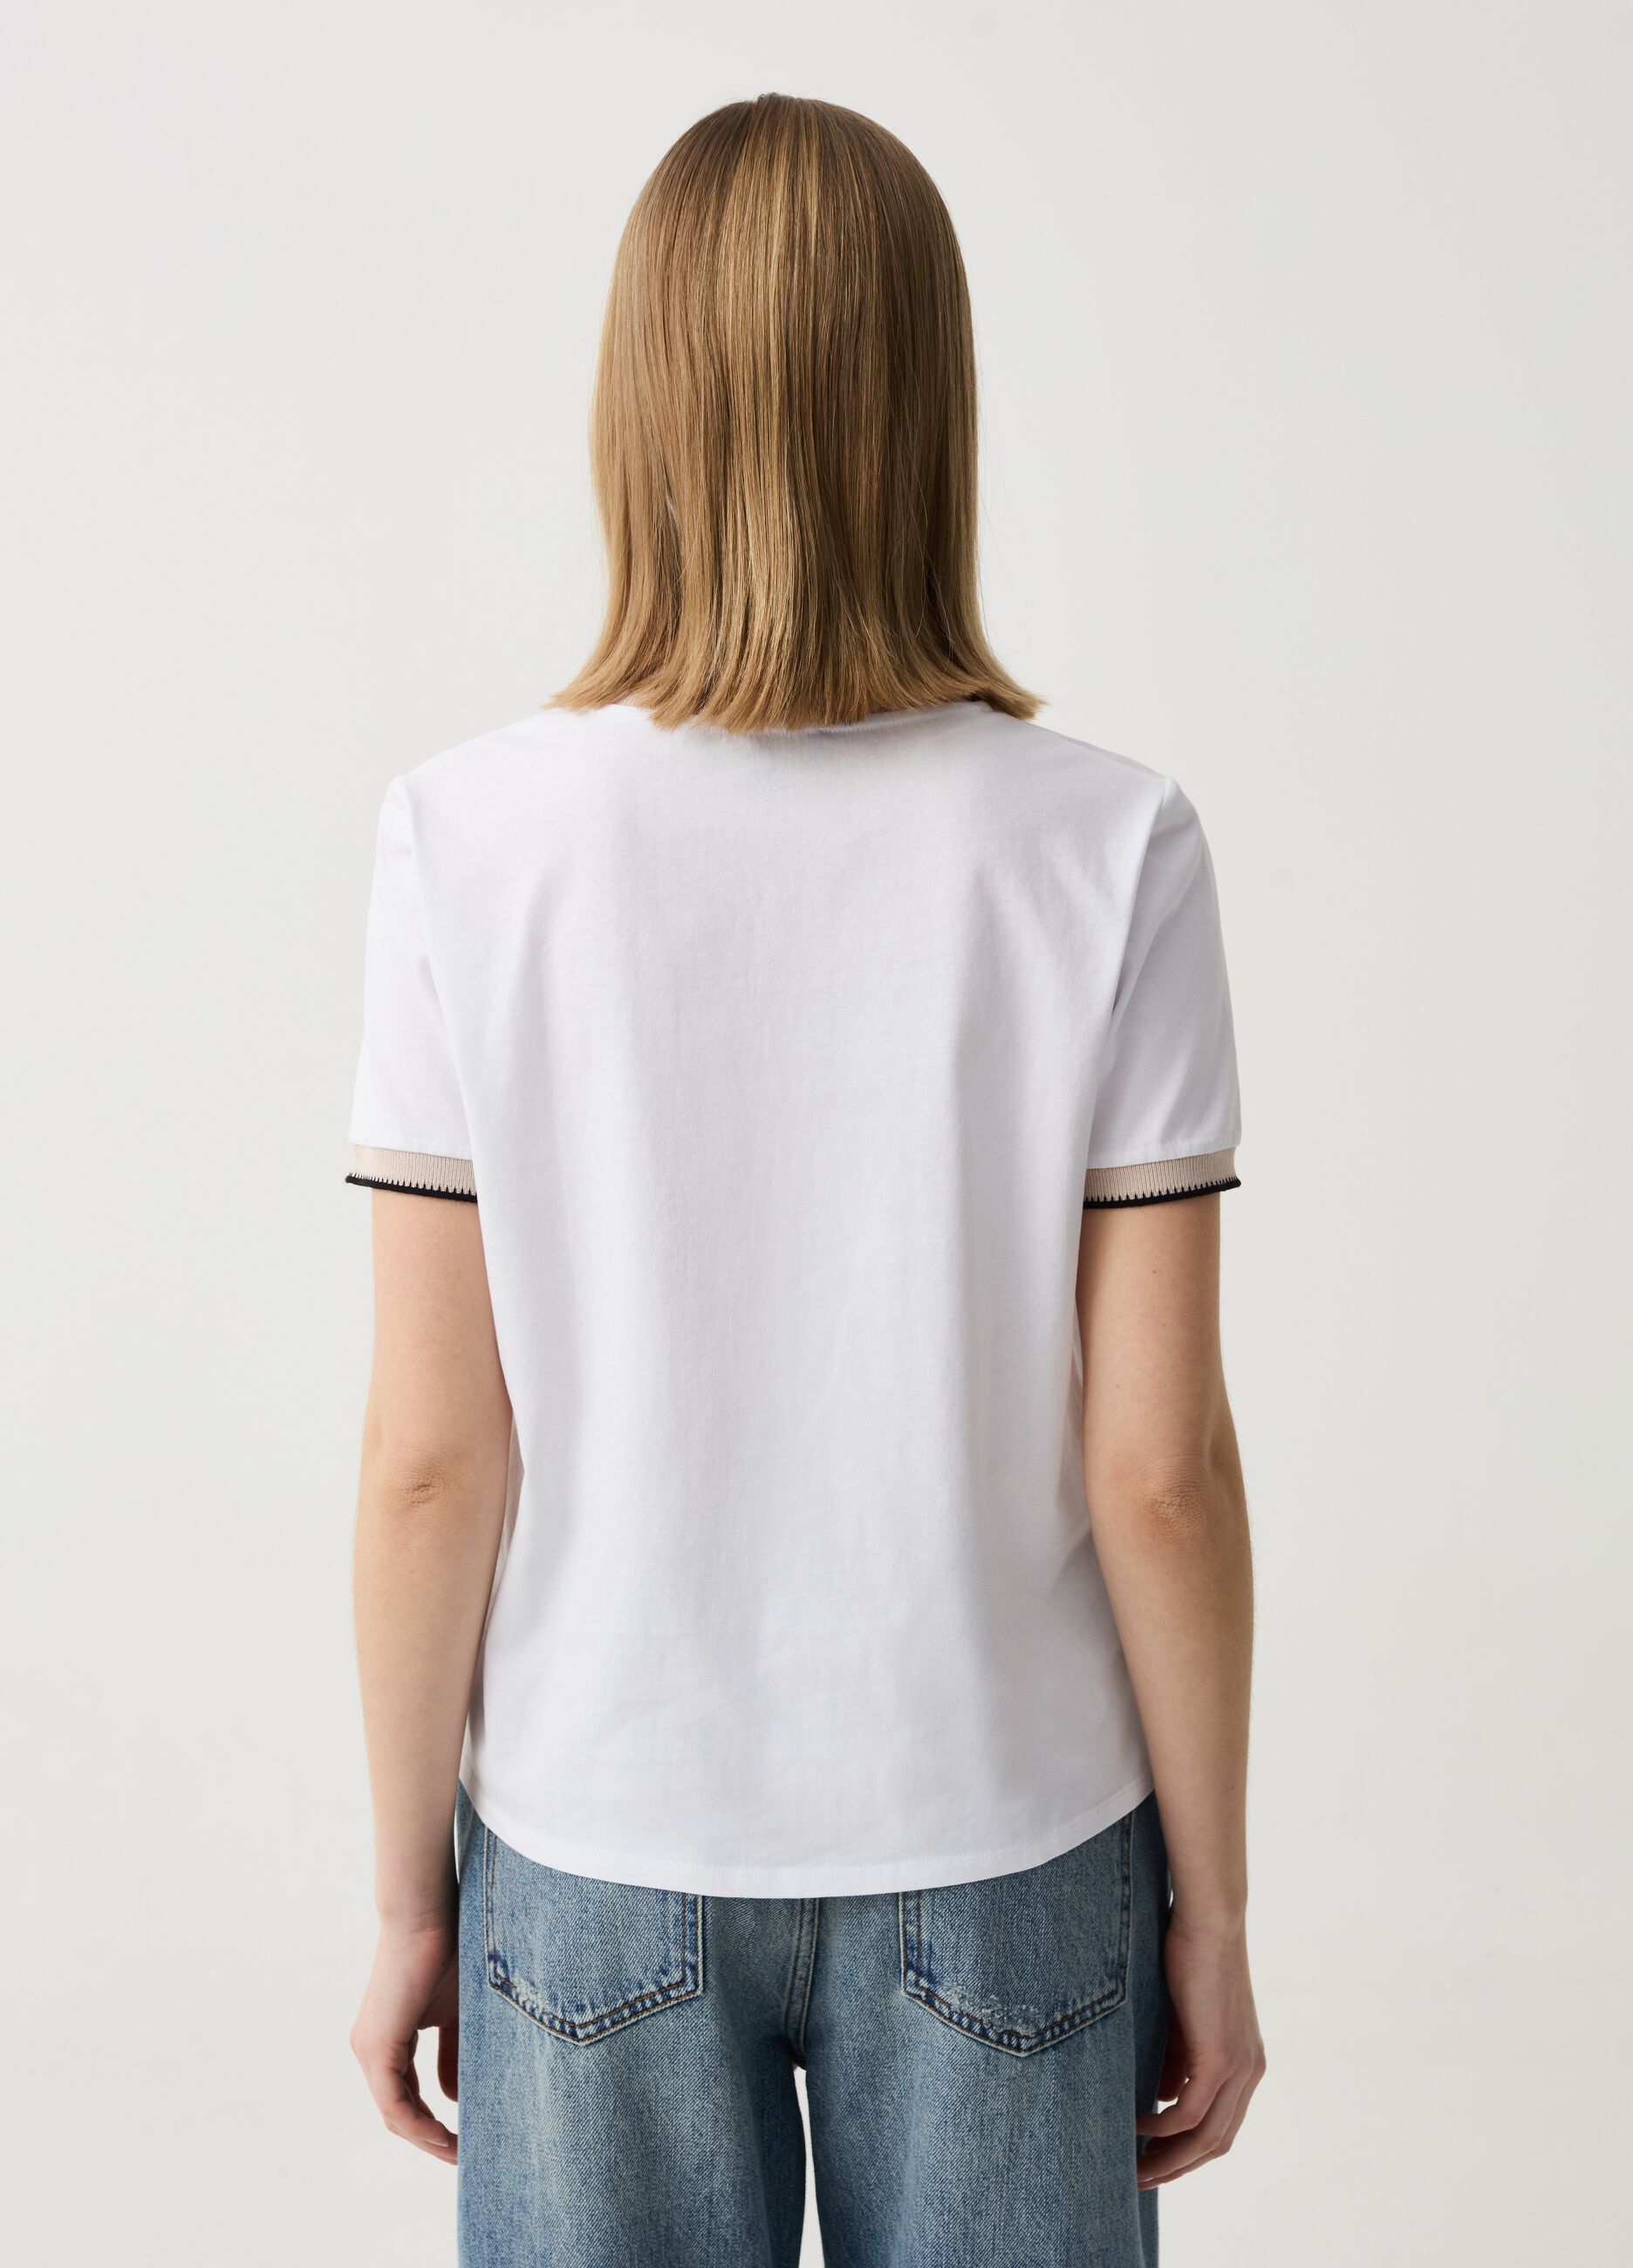 T-shirt with V neck and striped edging